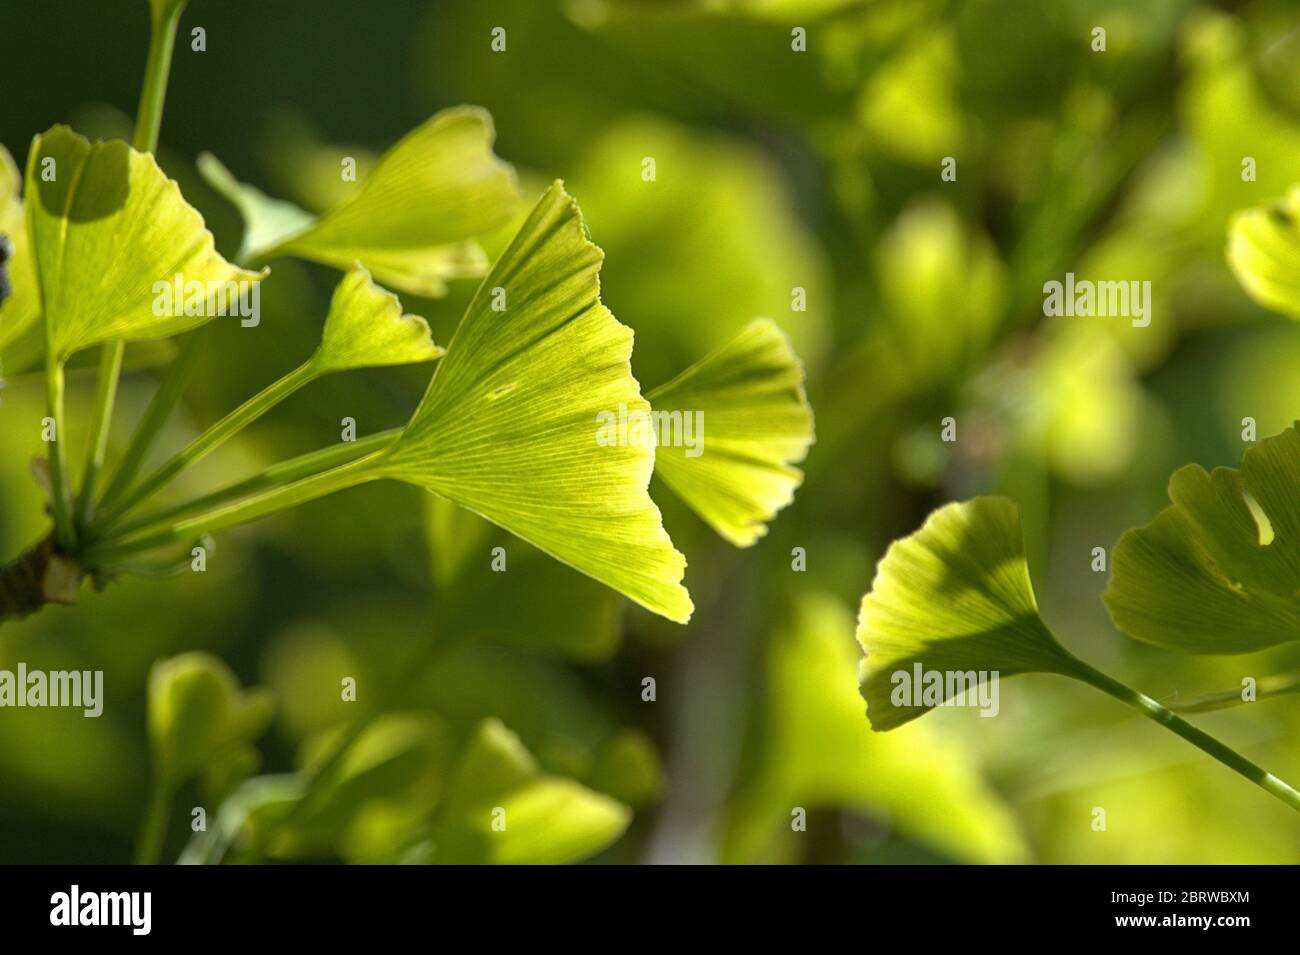 May 19, 2020, Schleswig-Holstein, Schleswig: Close-up of some freshly sprouting ginkgo leaves on a ginkgo tree in spring. Class: Ginkgo plants (Ginkgoopsida), order: Ginkgoales, family: Ginkgo waxes, genus: Ginkgo, species: Ginkgo | usage worldwide Stock Photo